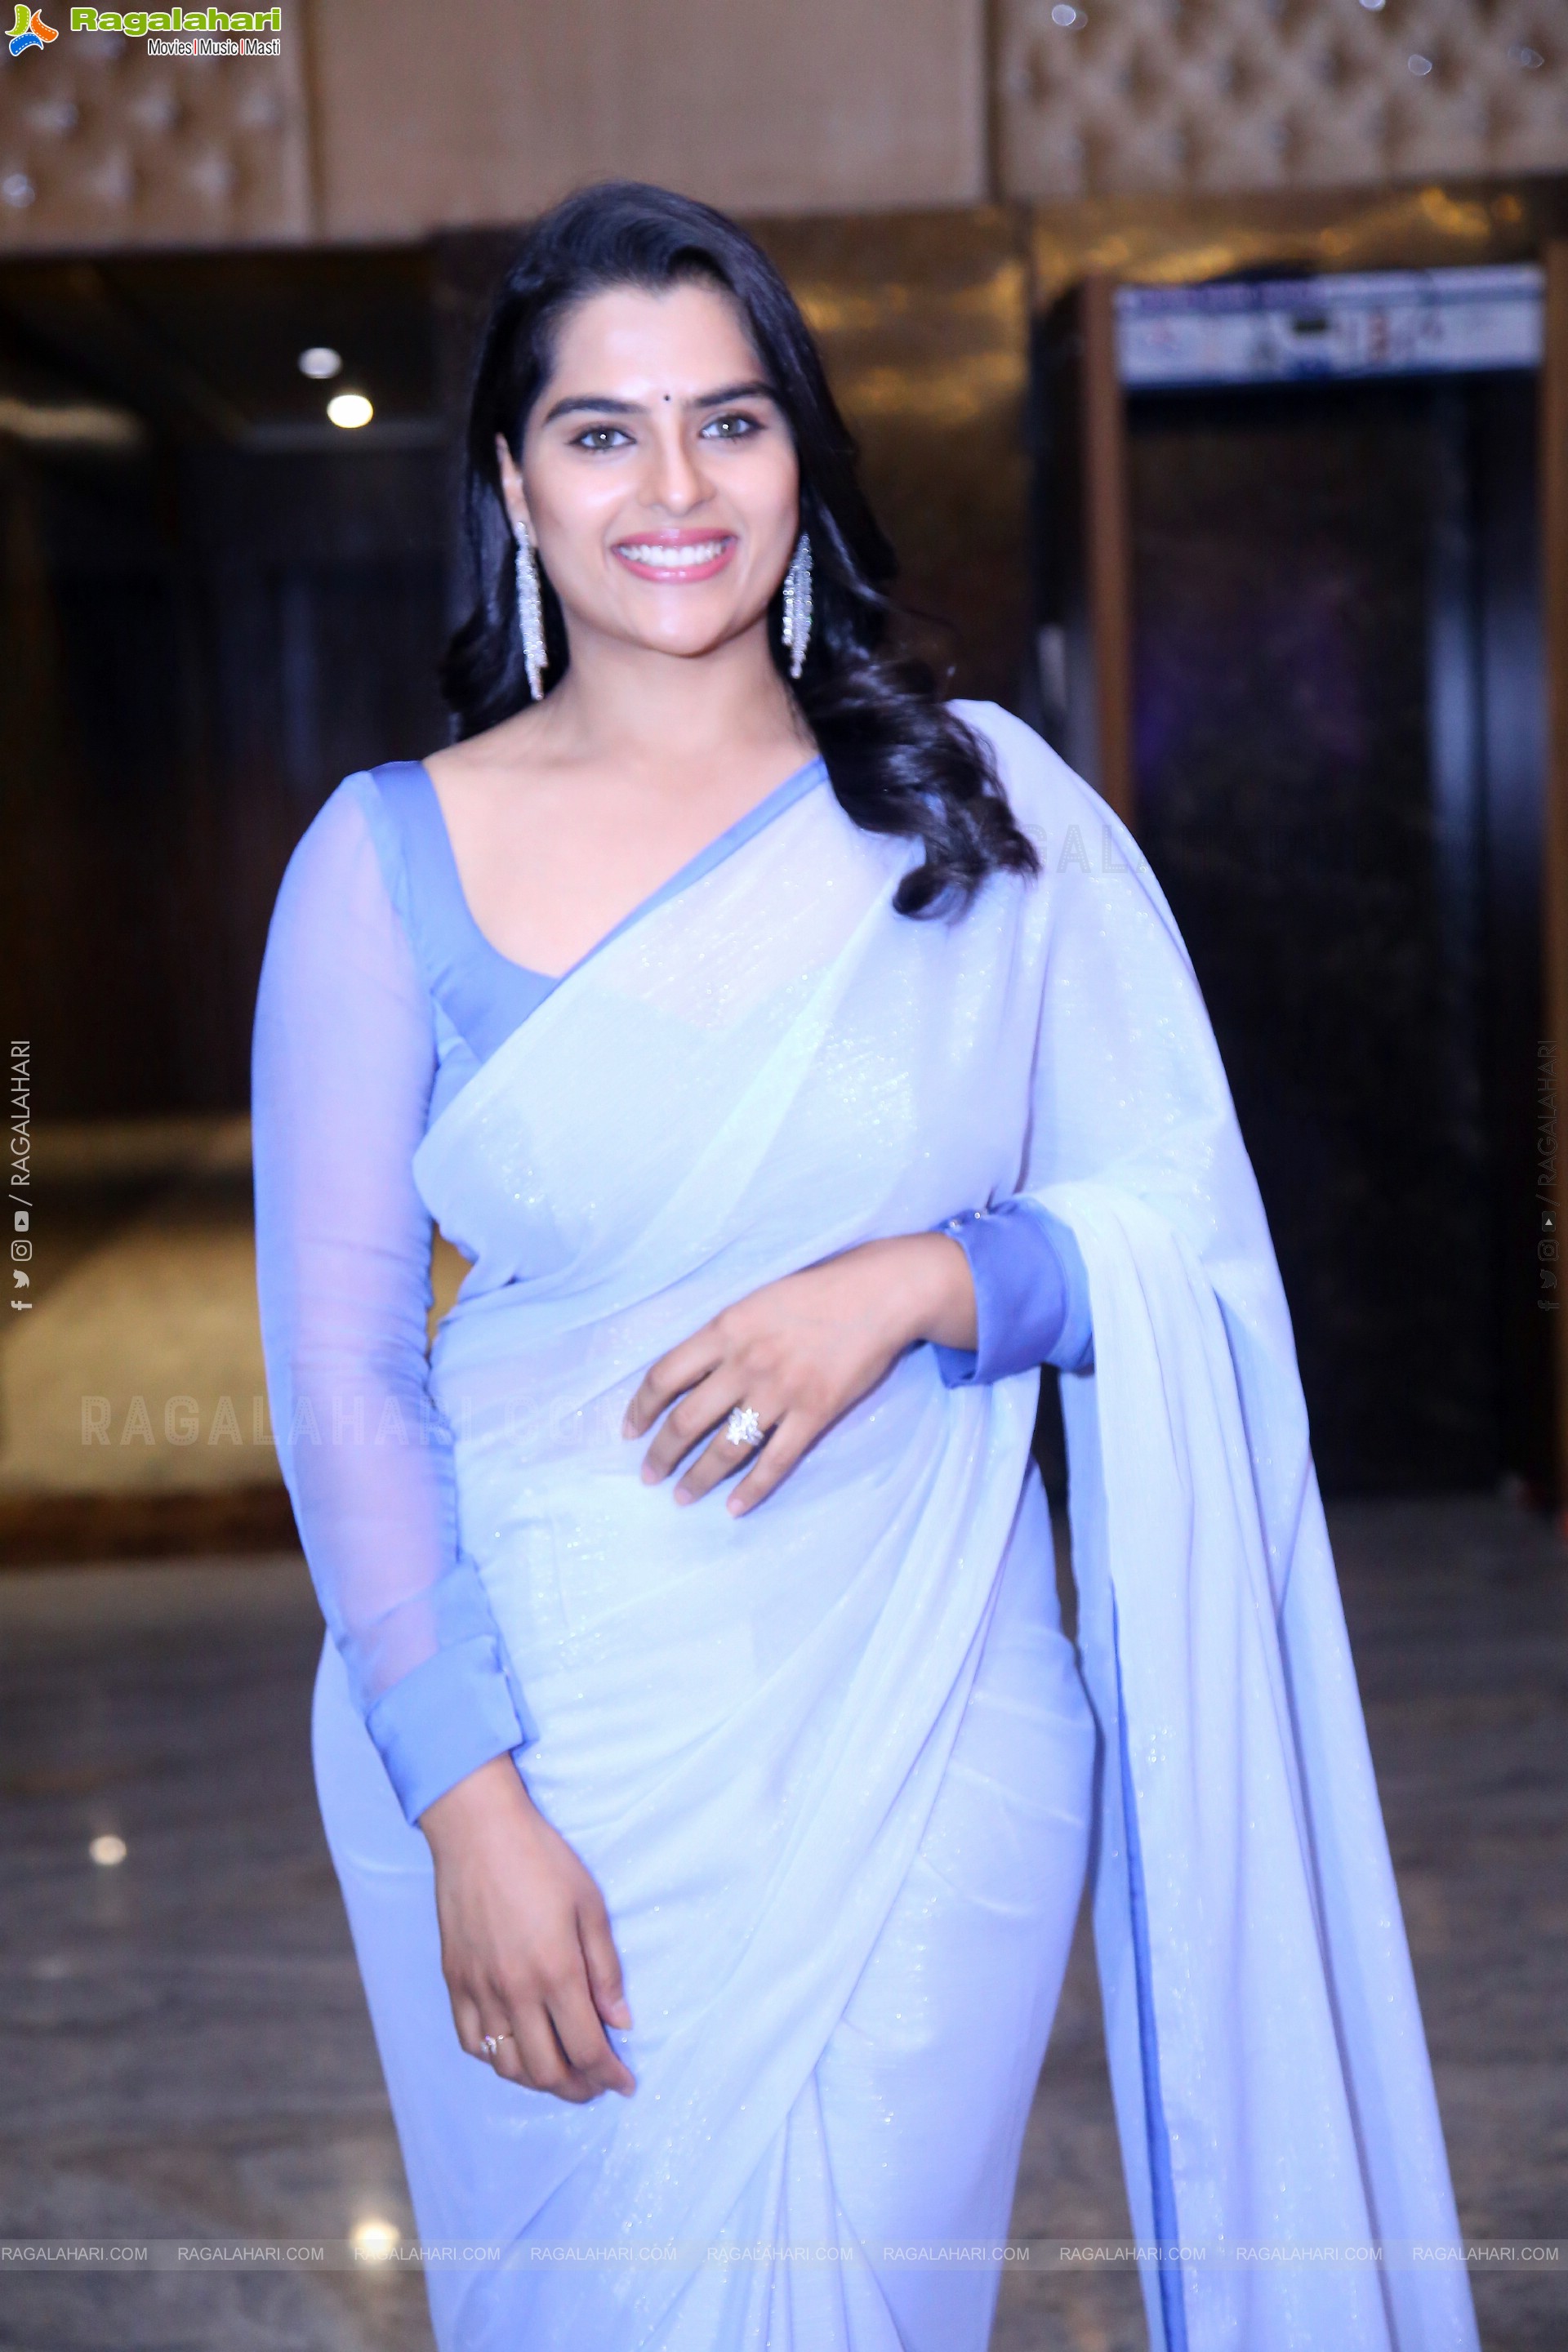 Kavya Kalyanram at Ustaad Pre Release Event, HD Gallery